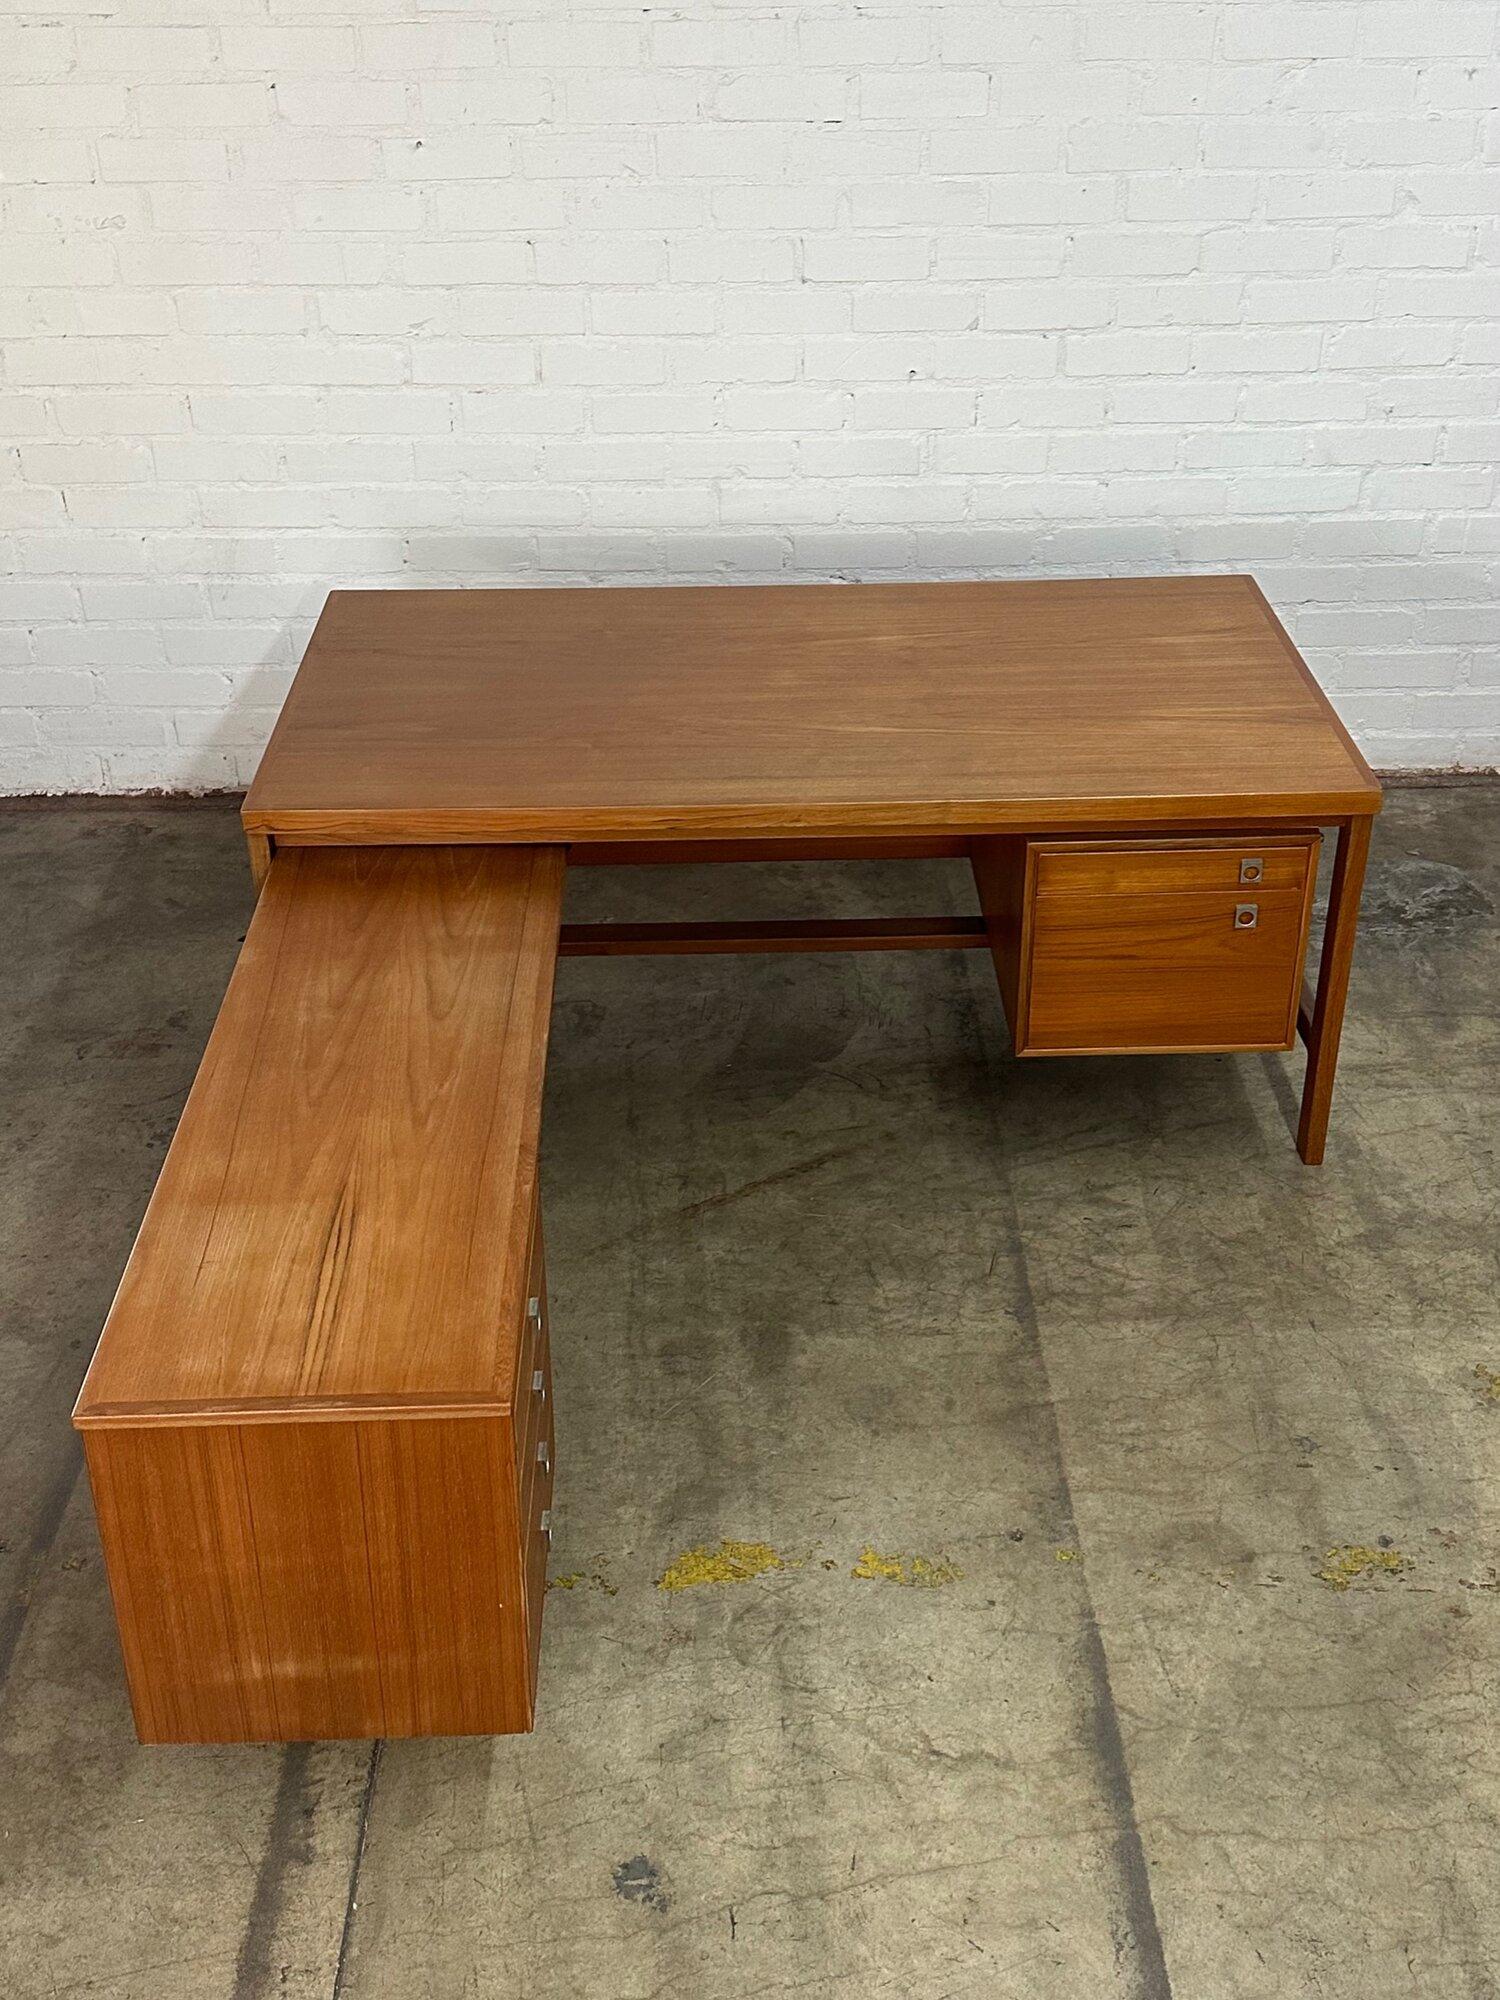 W69 D37.5 H28.5 KC26.5

L W53 D18 H25.5 KC23.5

Danish modern teak L shaped desk by Arne Vodder. Item is structurally sound and shows in great as found condition. Original owner had this item recently refinished. Desk shows with very light sun